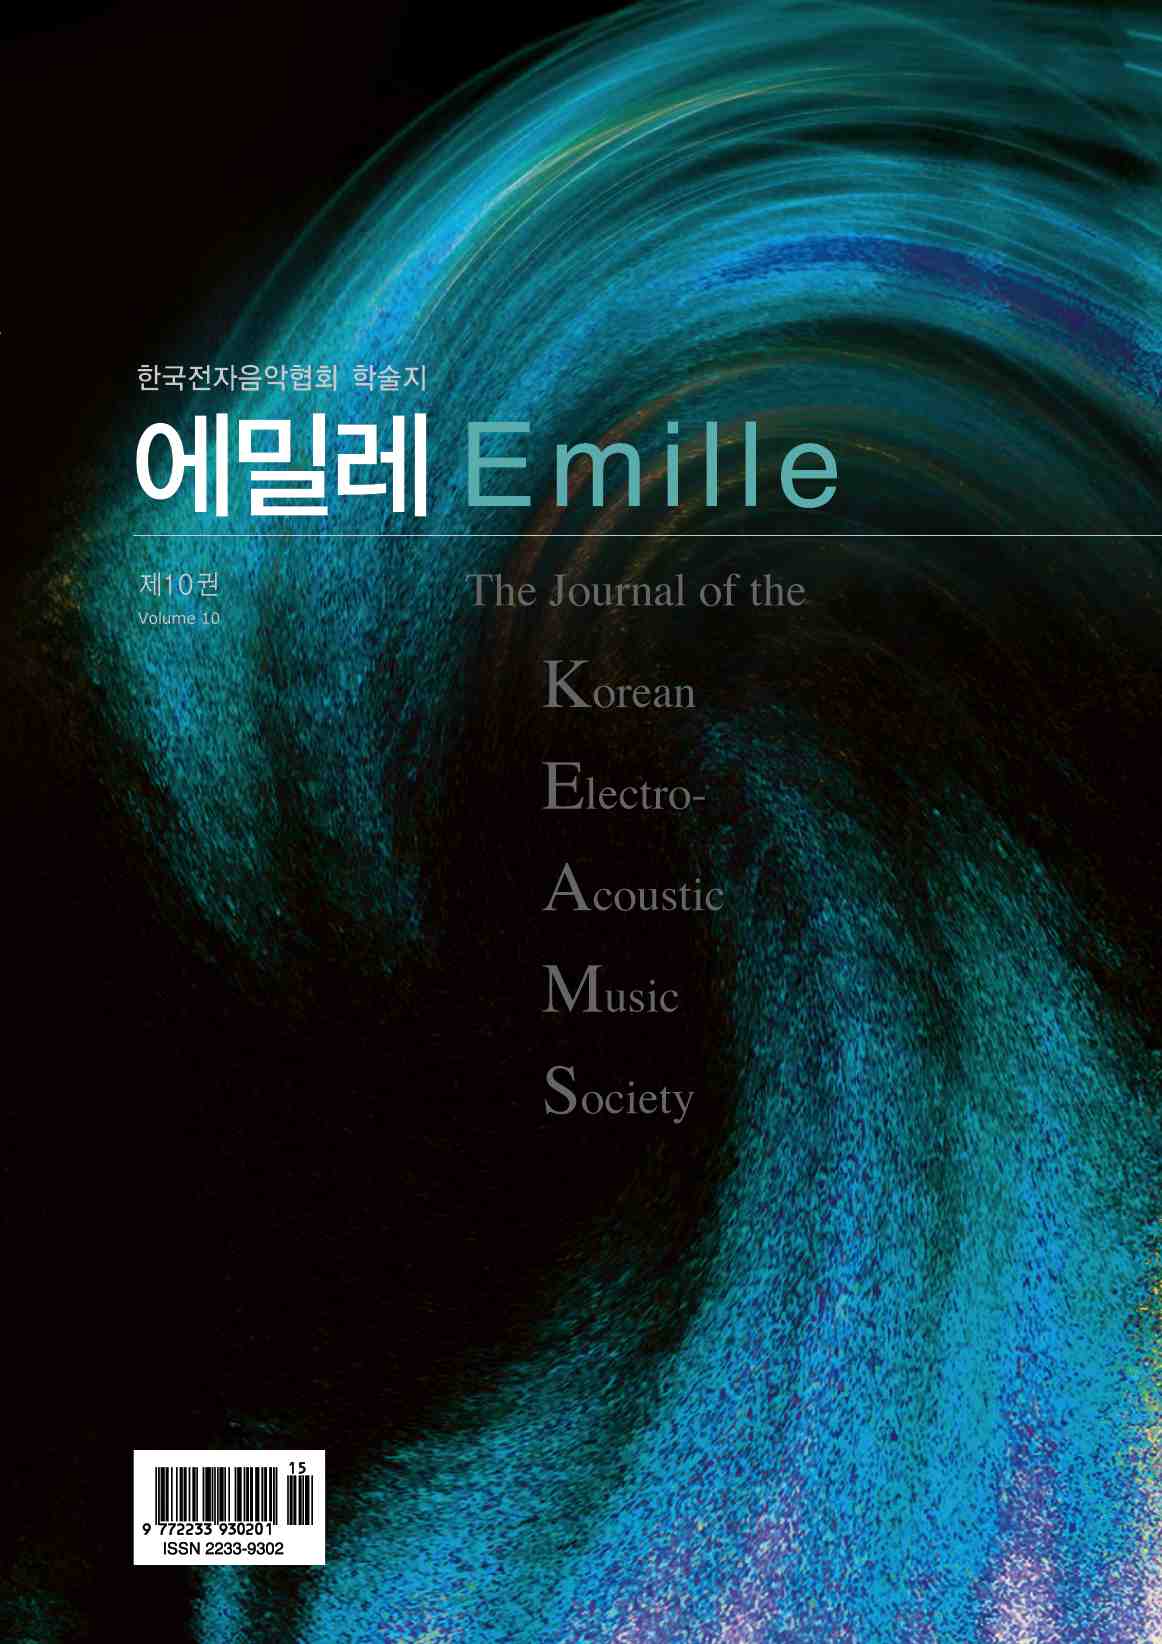 emille vol. 10 cover